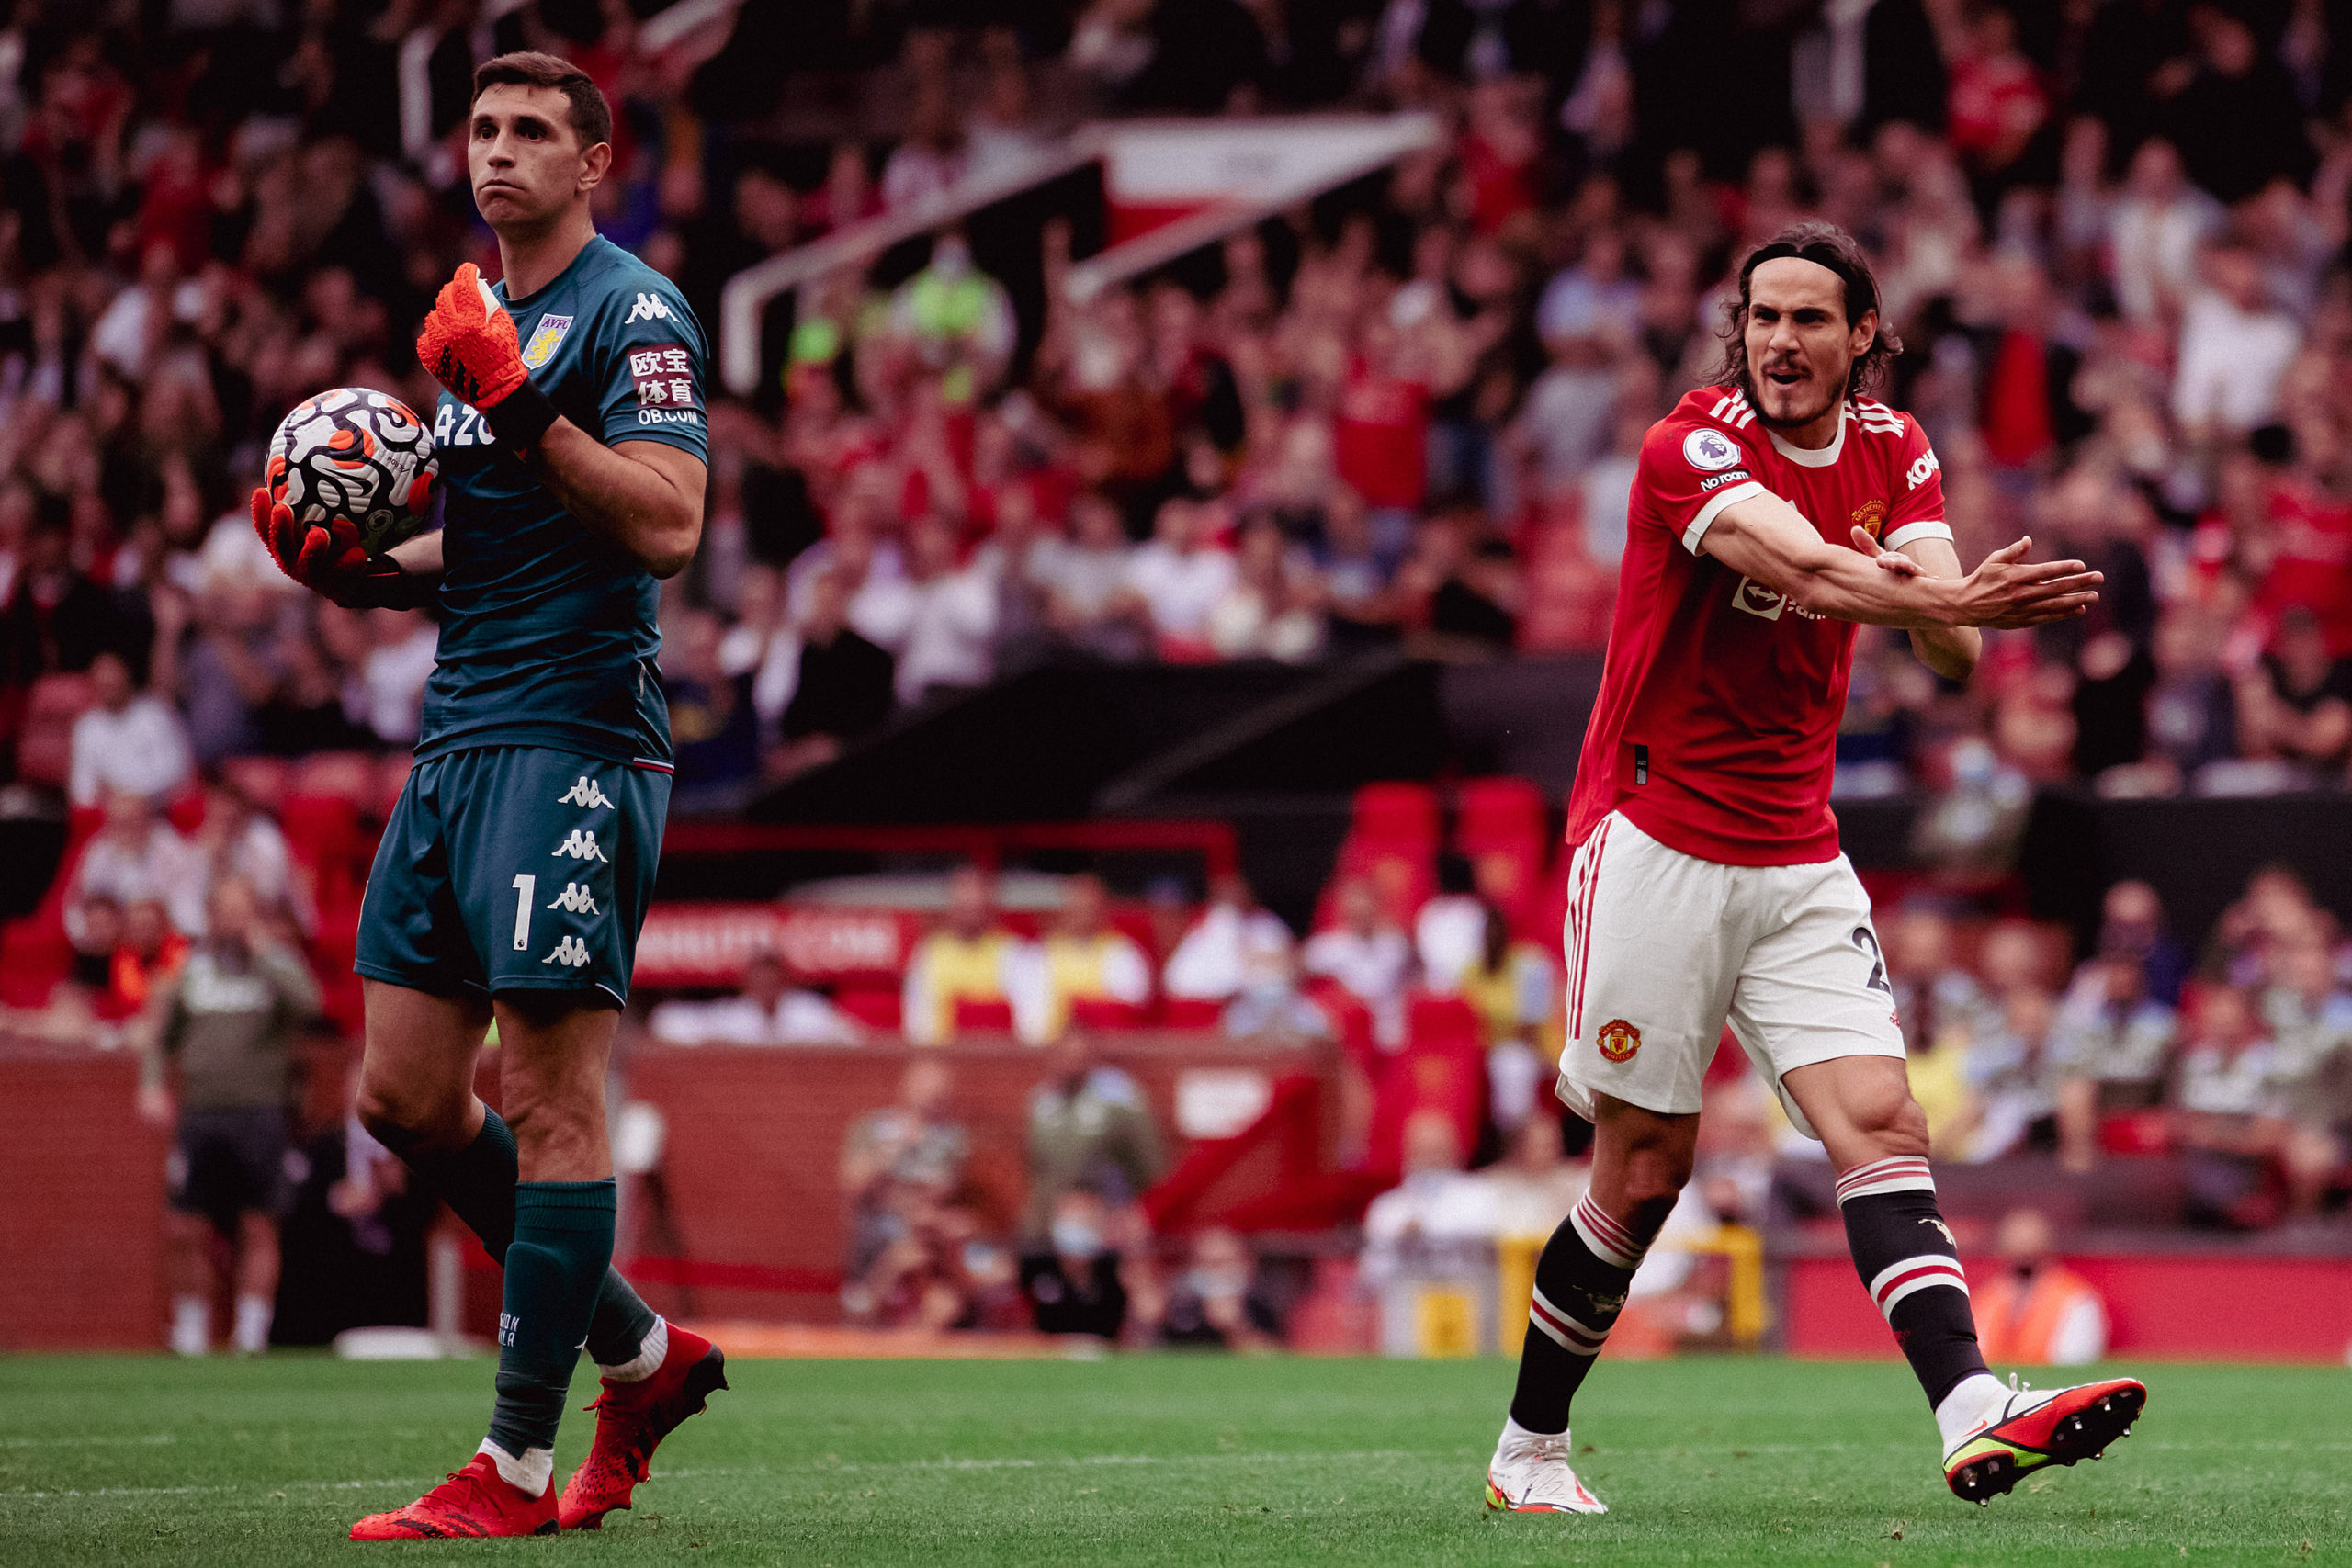 Three reasons for Manchester United to be wary of Aston Villa